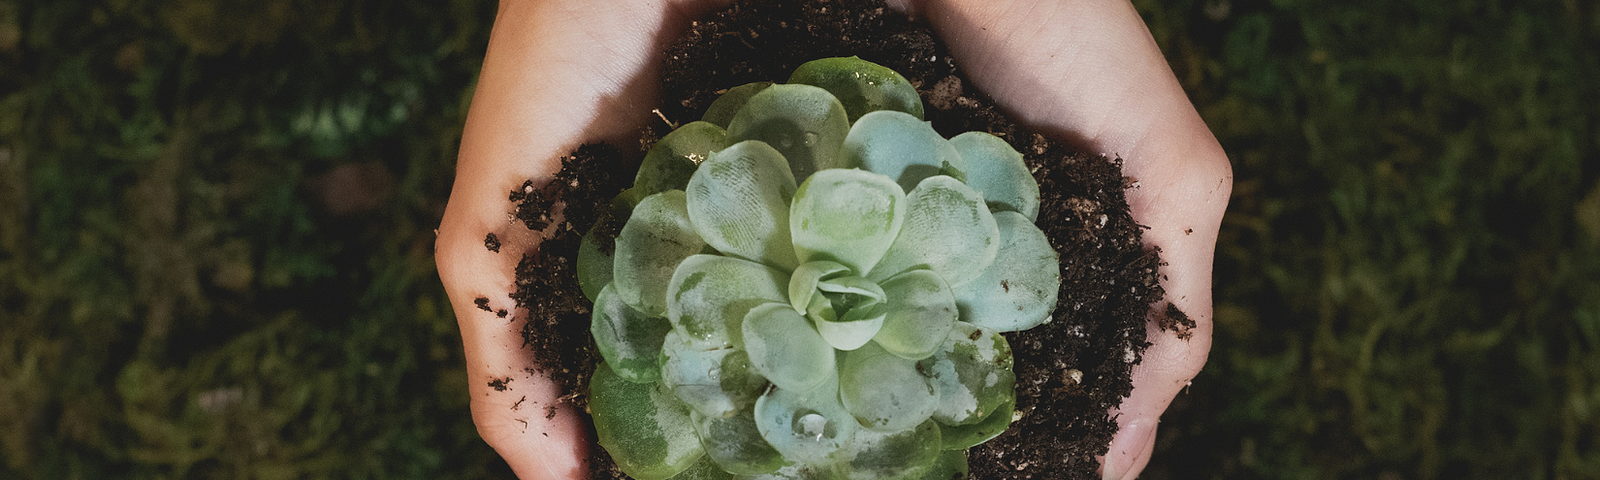 Woman’s hands cupping a small succulent plant in dirt